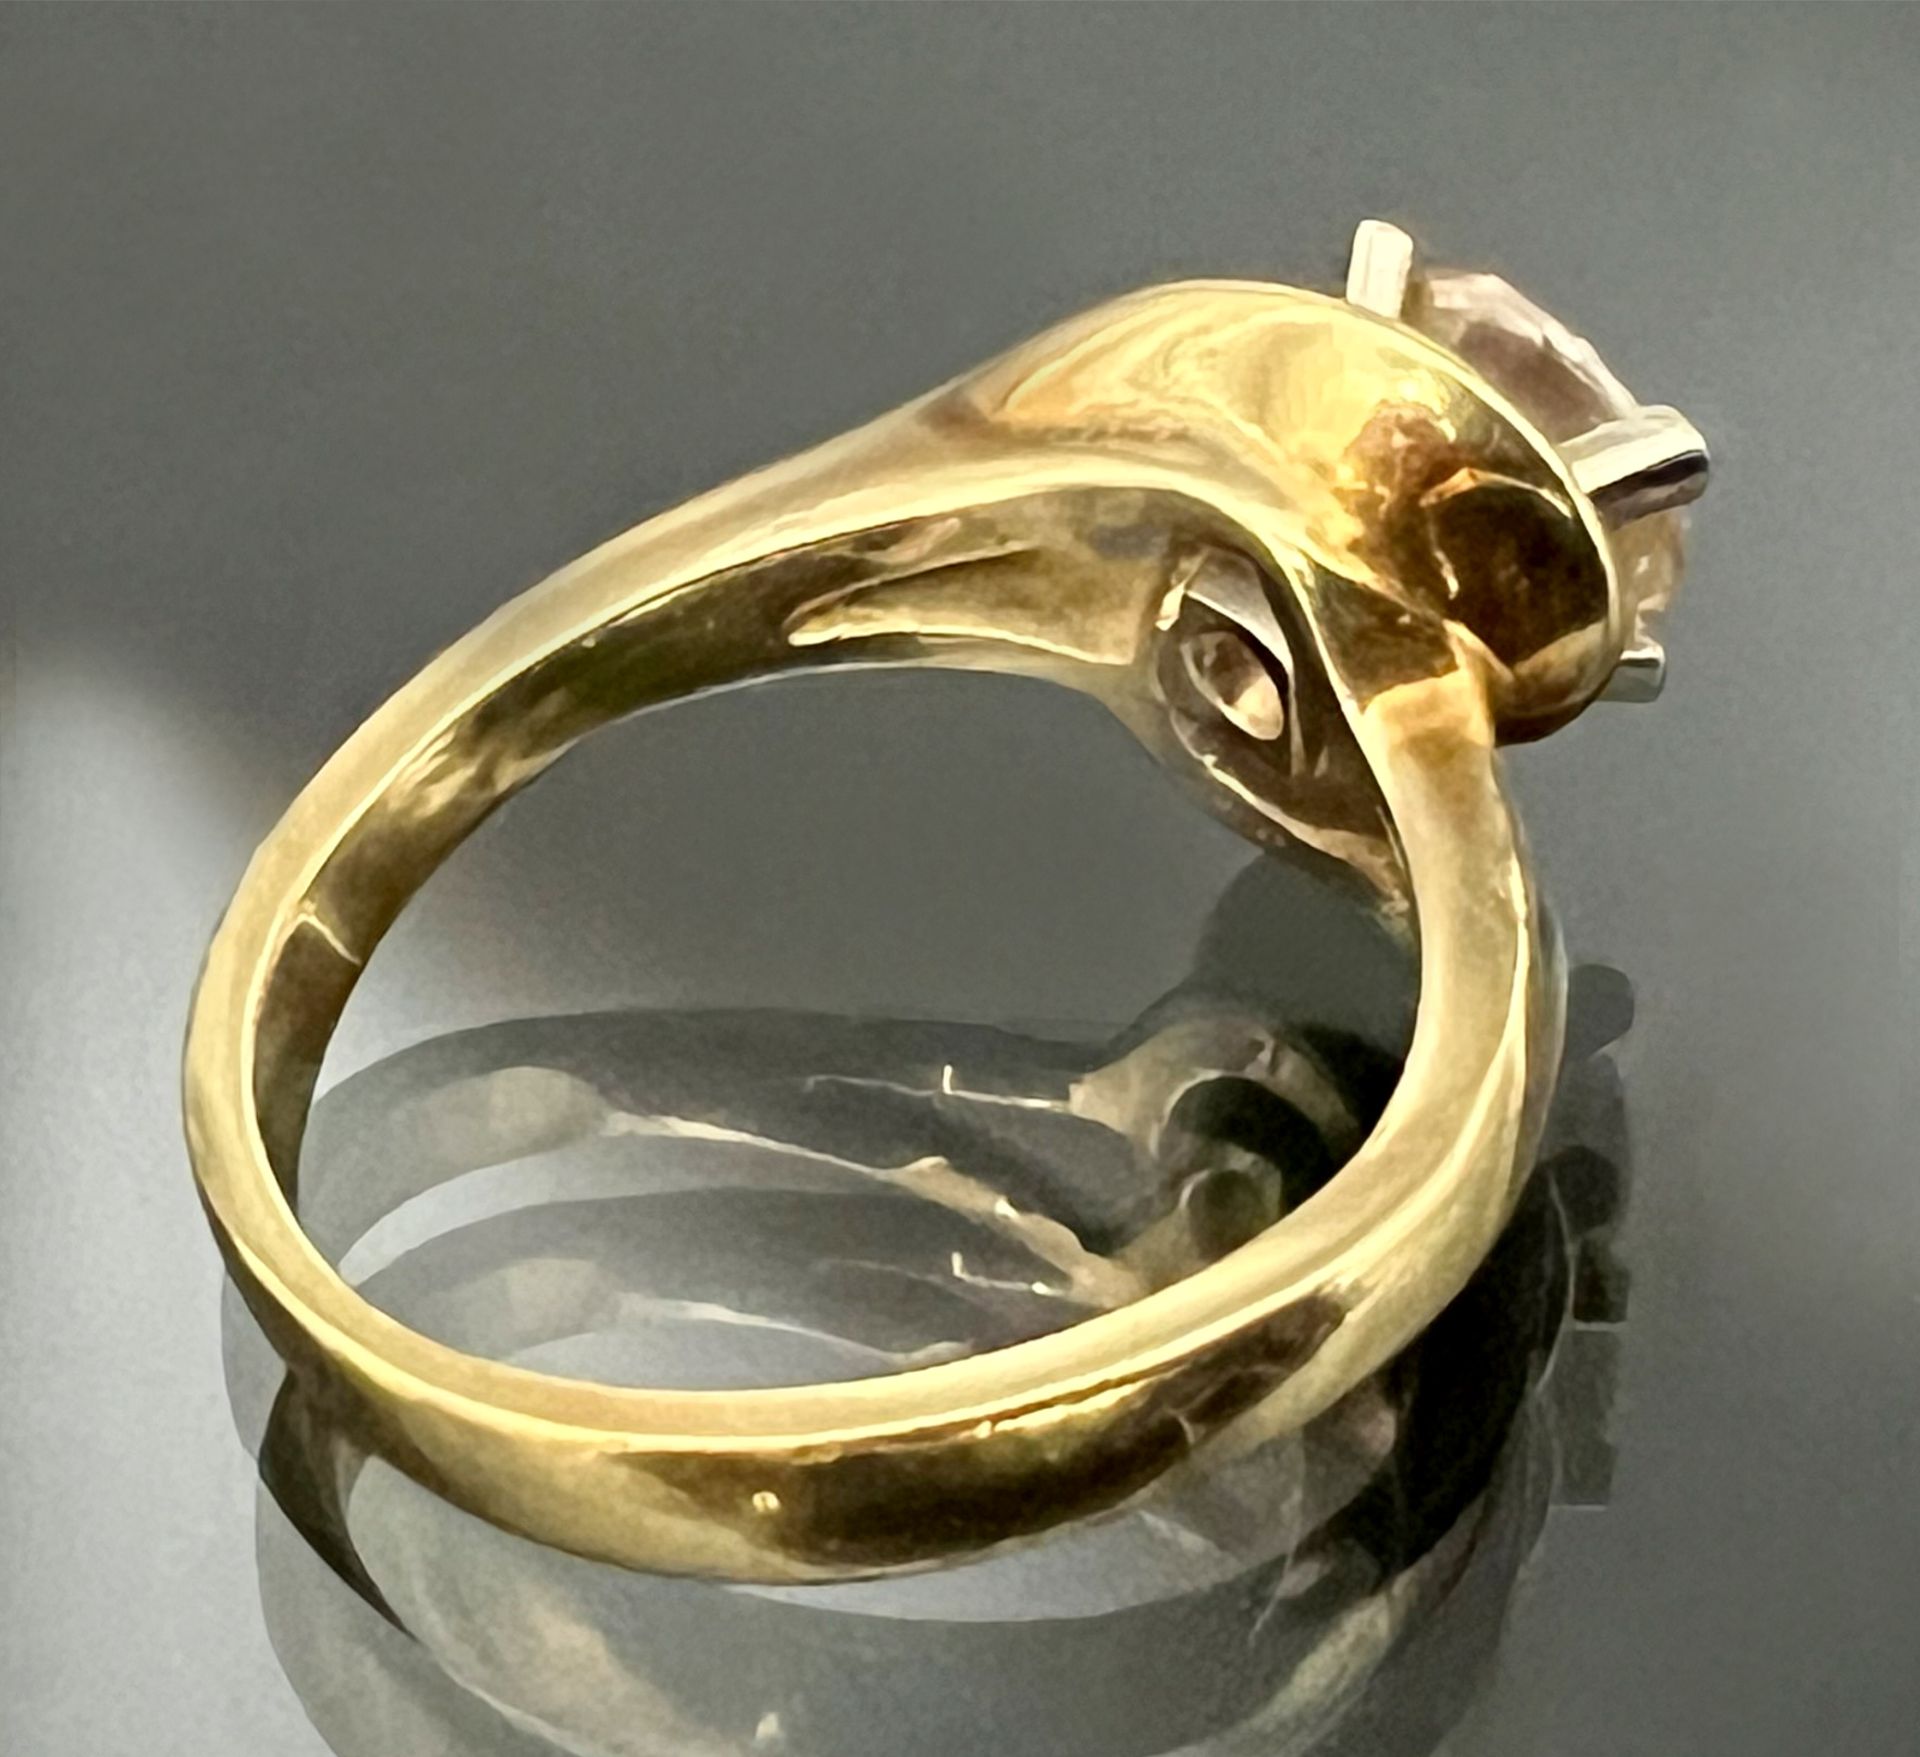 Solitaire ring 585 yellow gold with a brilliant-cut diamond of approx. 1.00 ct. - Image 3 of 5